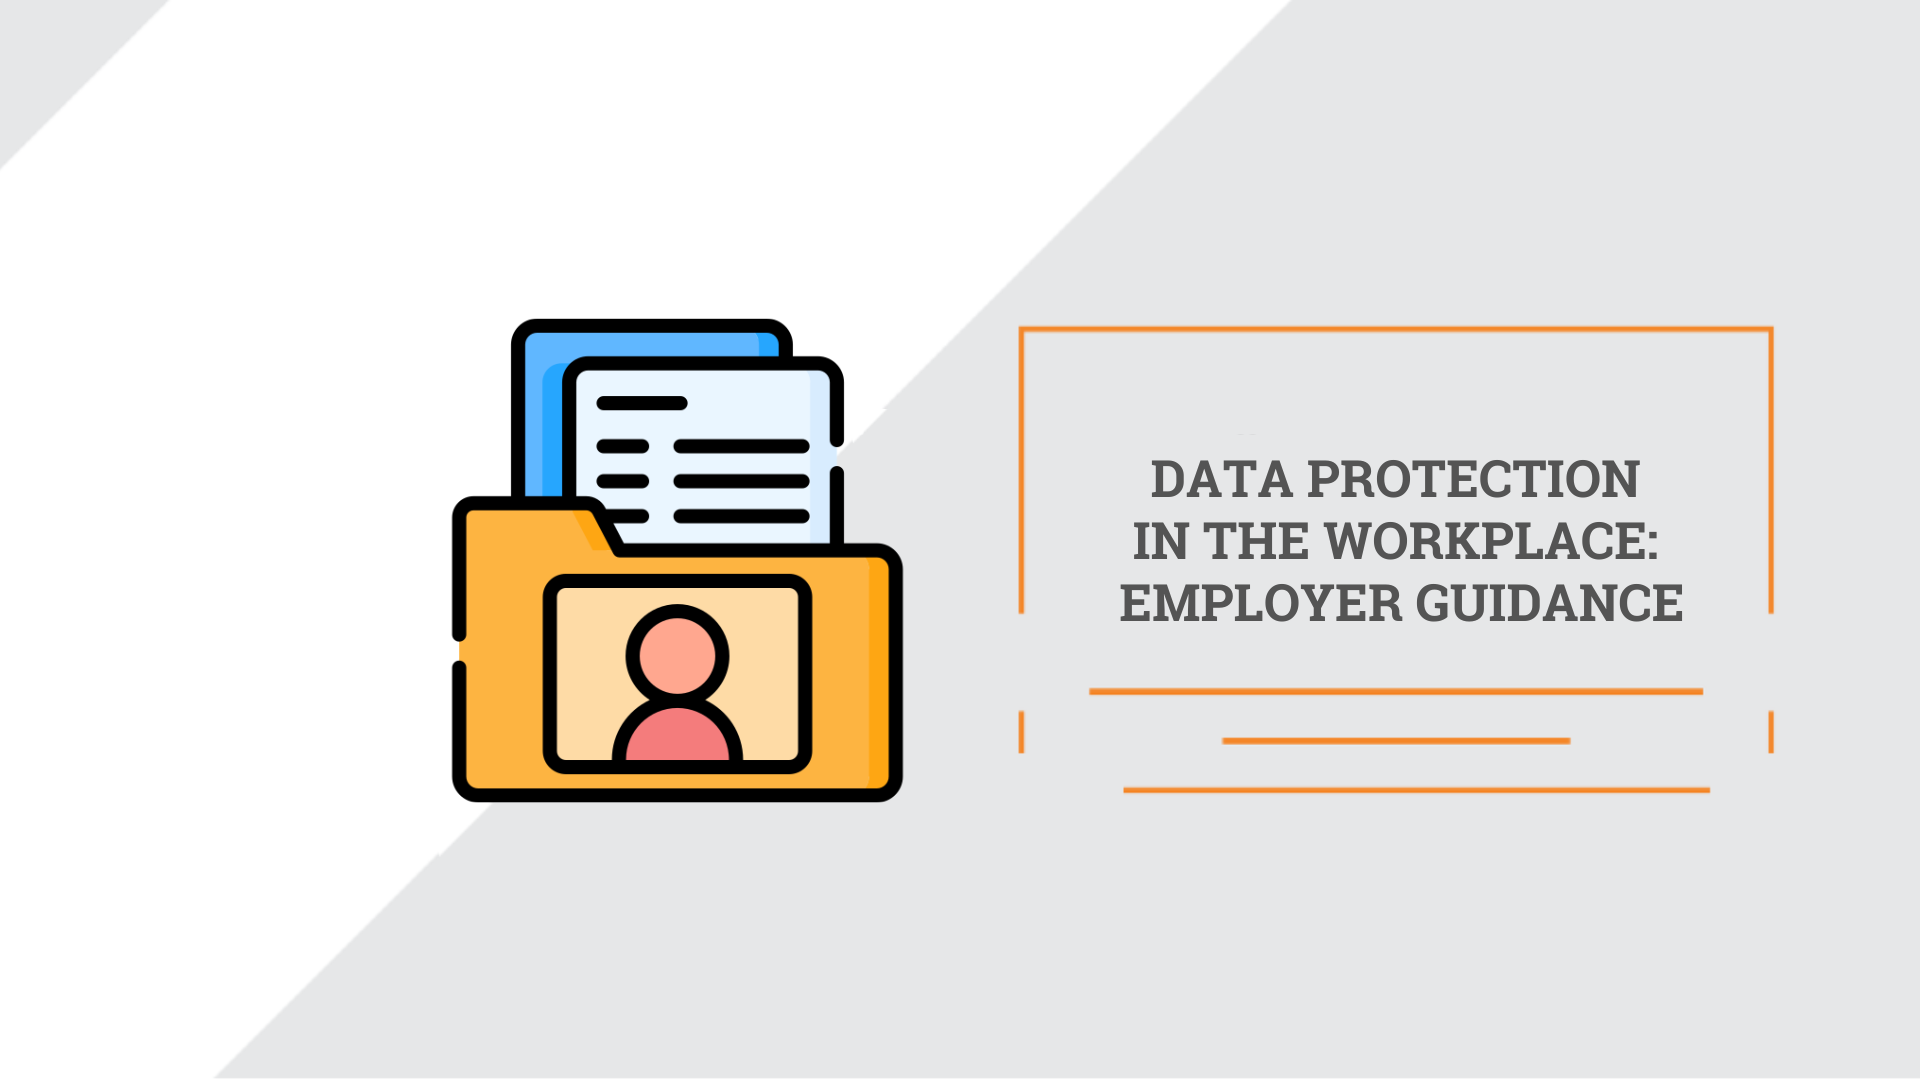 Data Protection in the Workplace: Employer Guidance